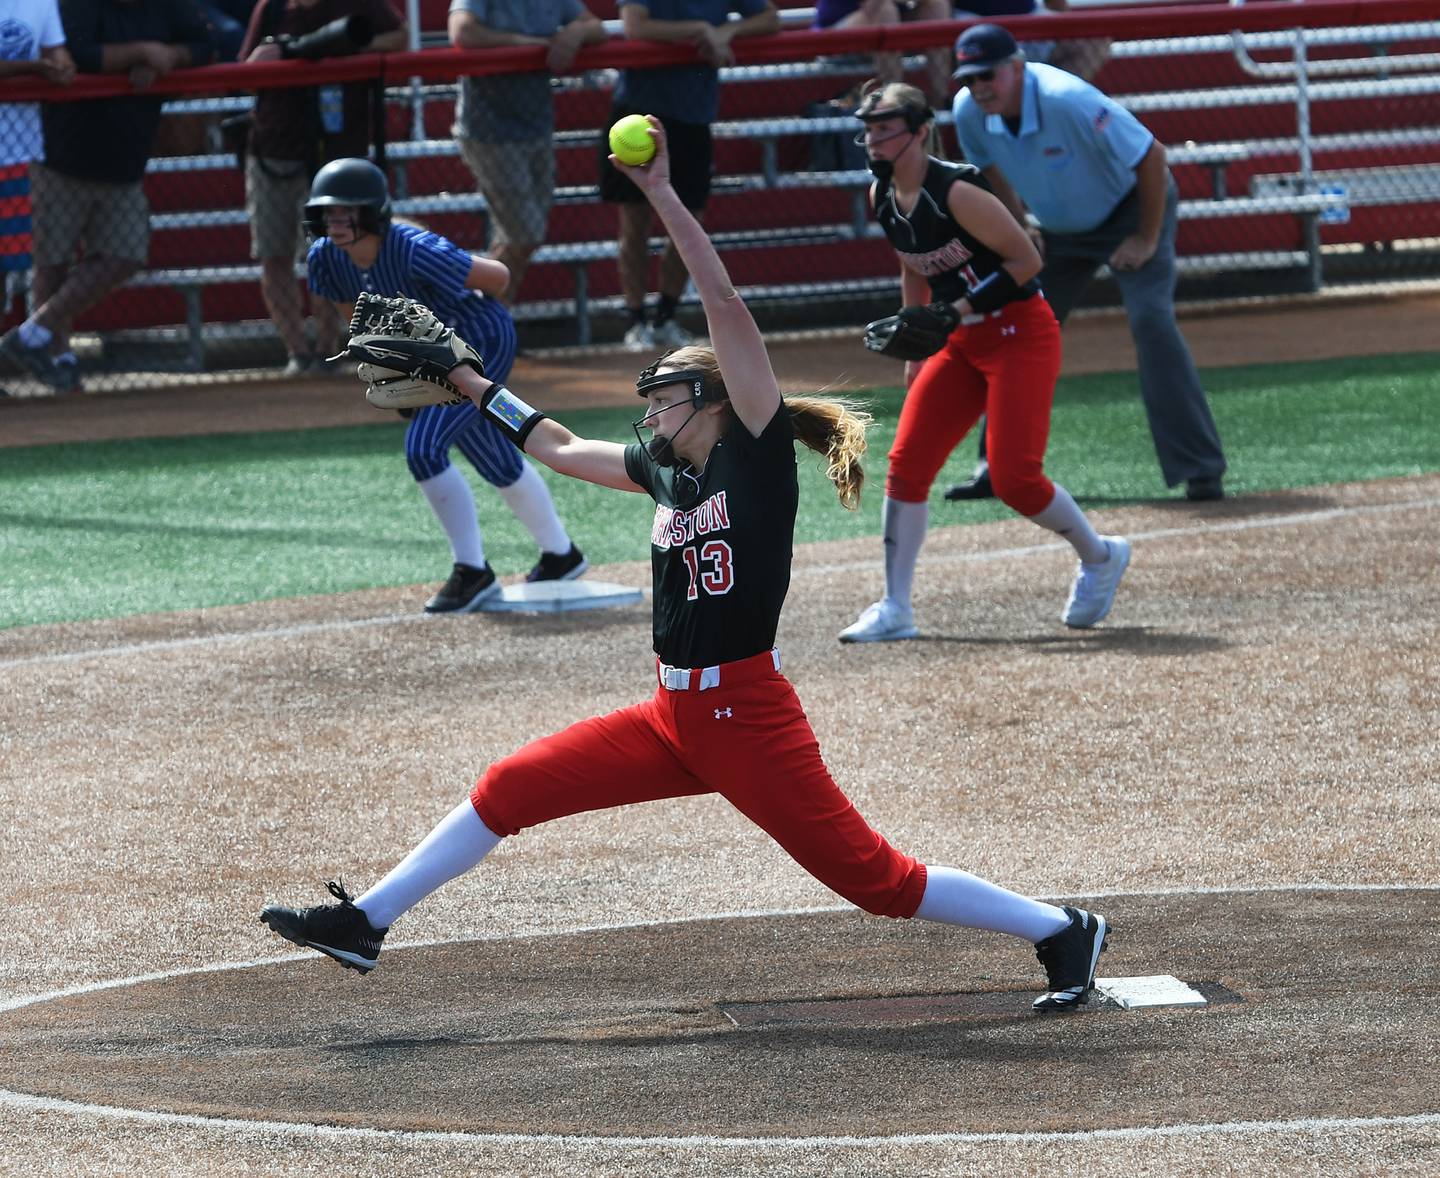 Forreston's Kara Erdmann delivers a pitch during action against Newark in the 1A third place game on June 4 in Peoria. The Cardinals beat Newark 4-2.